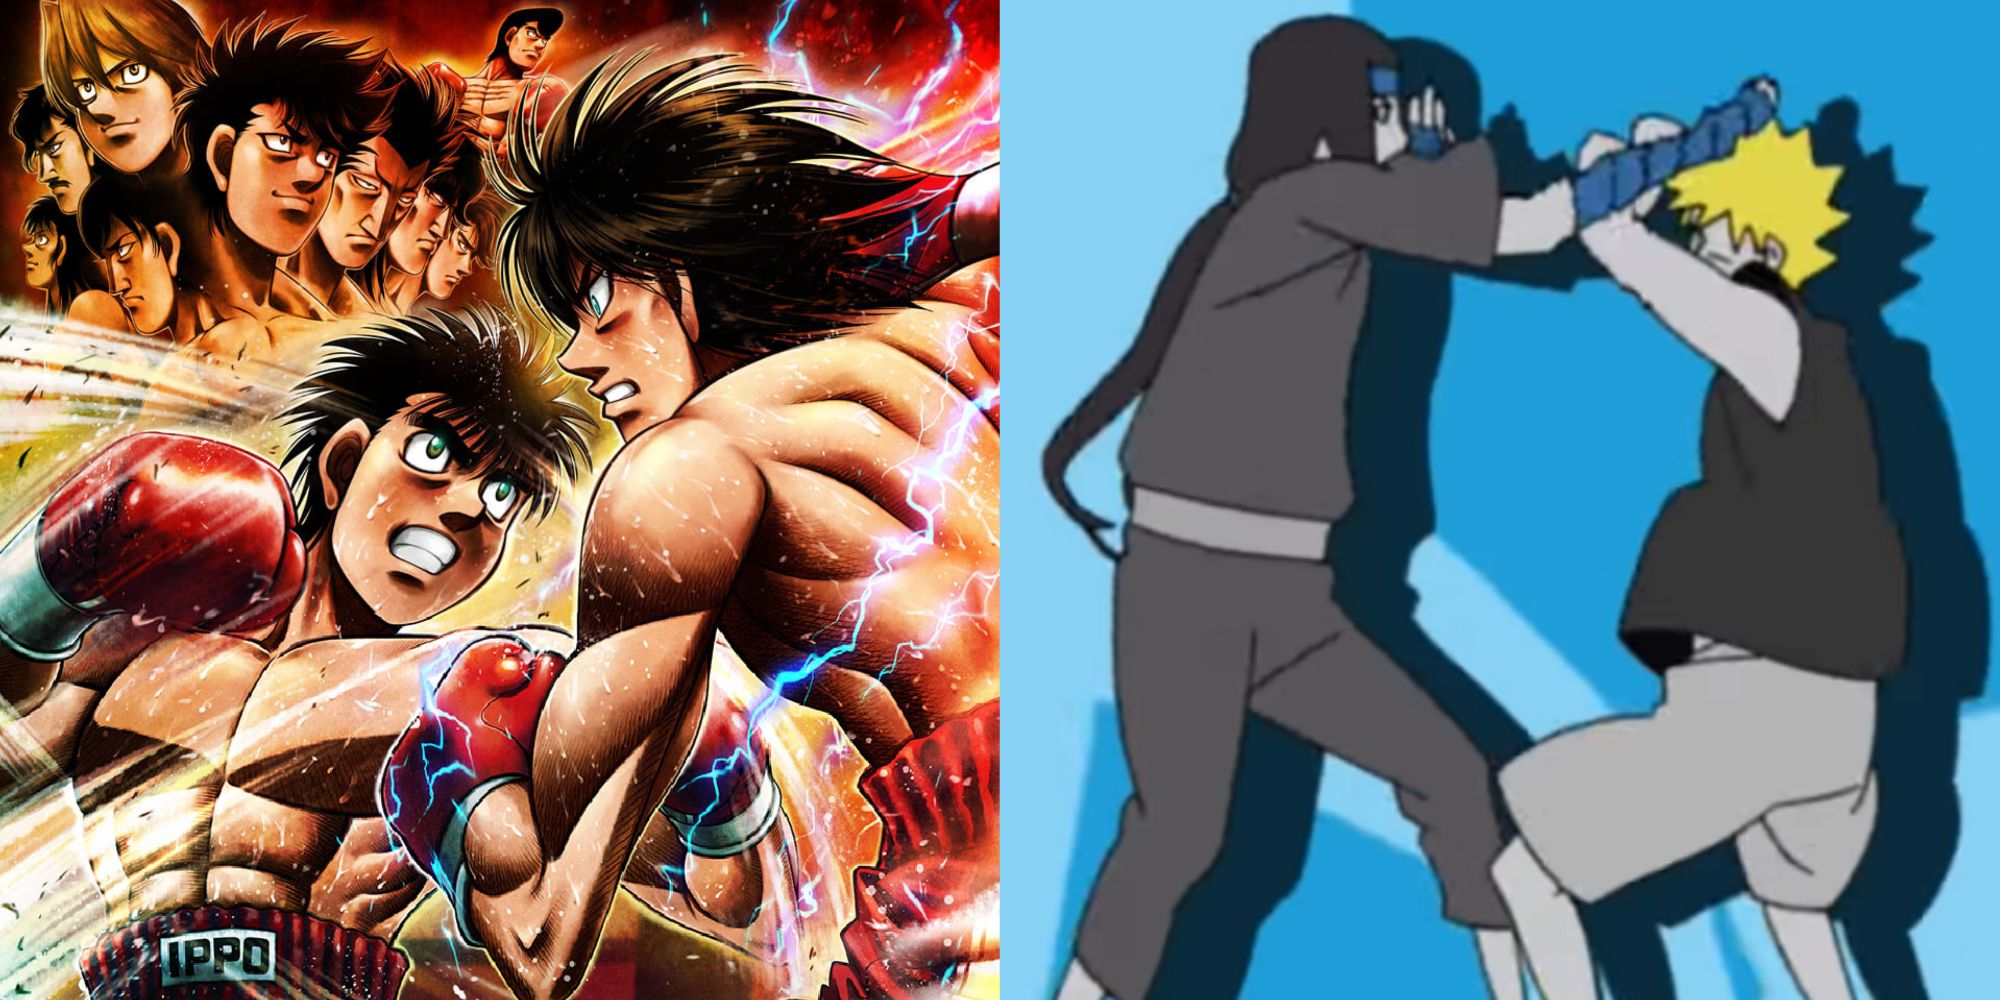 fitnessbased anime games featured image with relevant hajime no ippo and naruto art